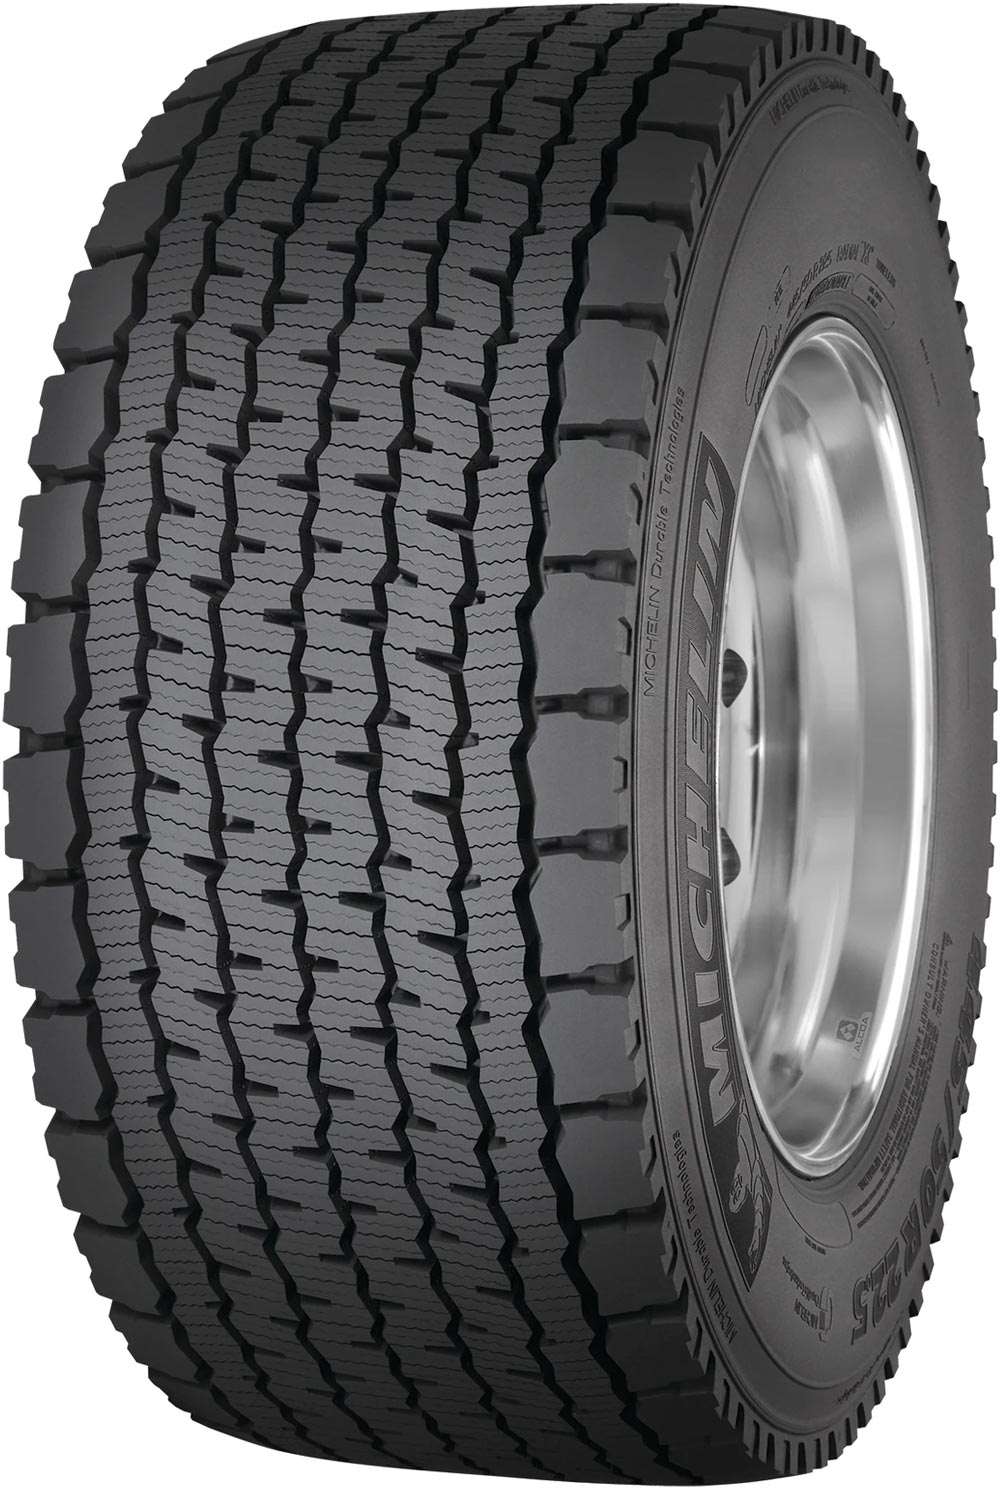 product_type-heavy_tires MICHELIN X ONE XDN 2 GRIP 295/80 R22.5 152M